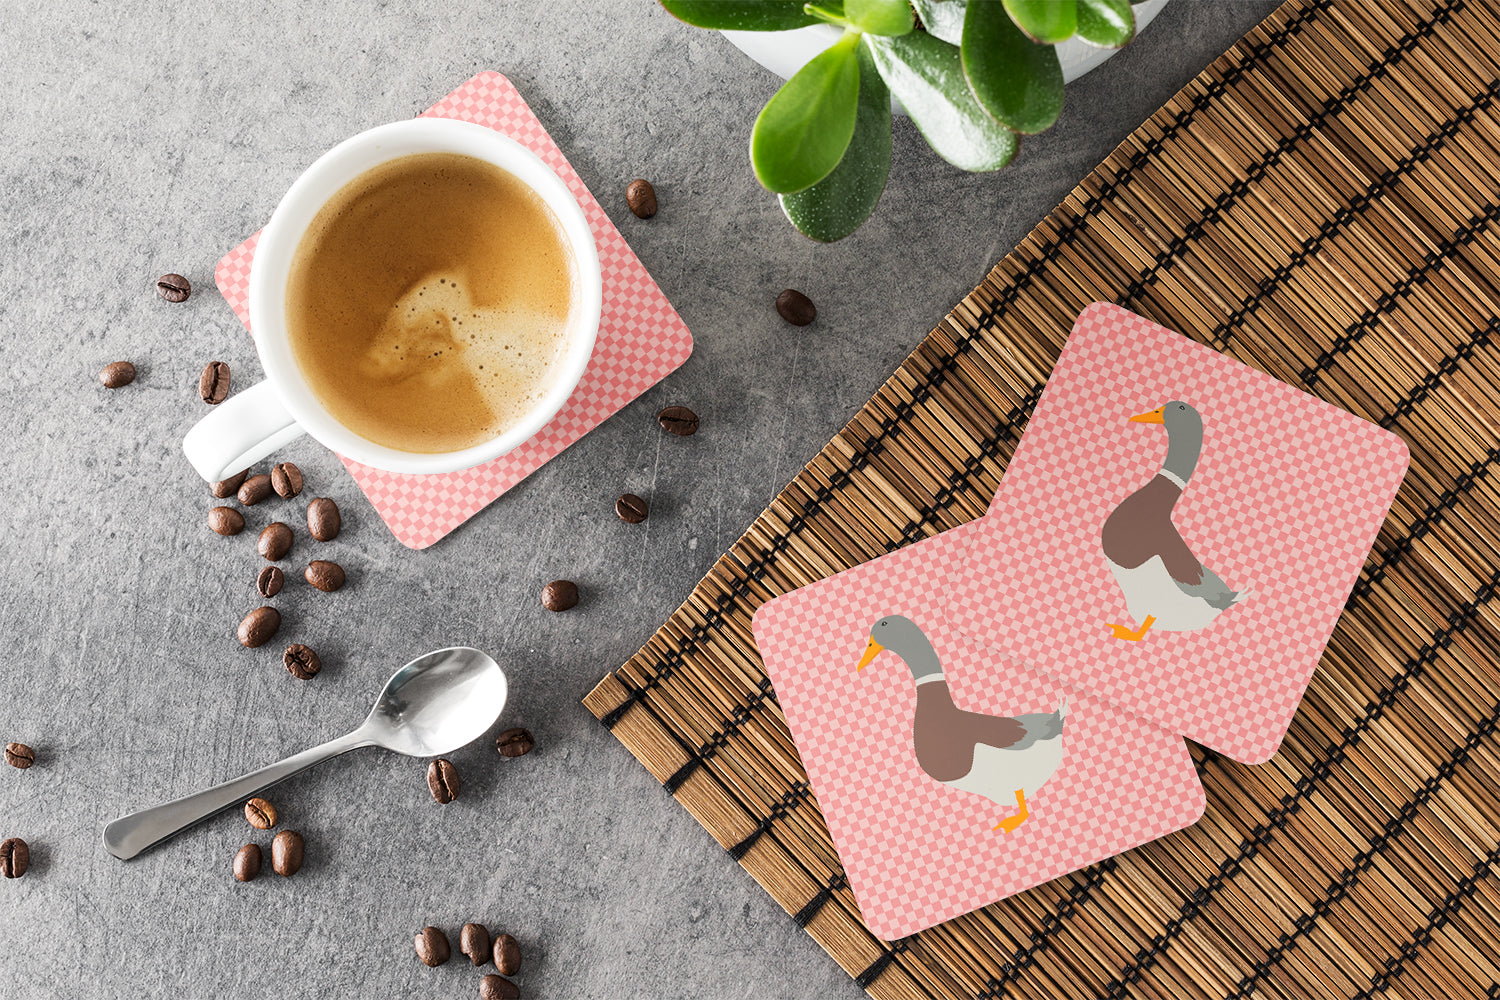 Saxony Sachsenente Duck Pink Check Foam Coaster Set of 4 BB7863FC - the-store.com